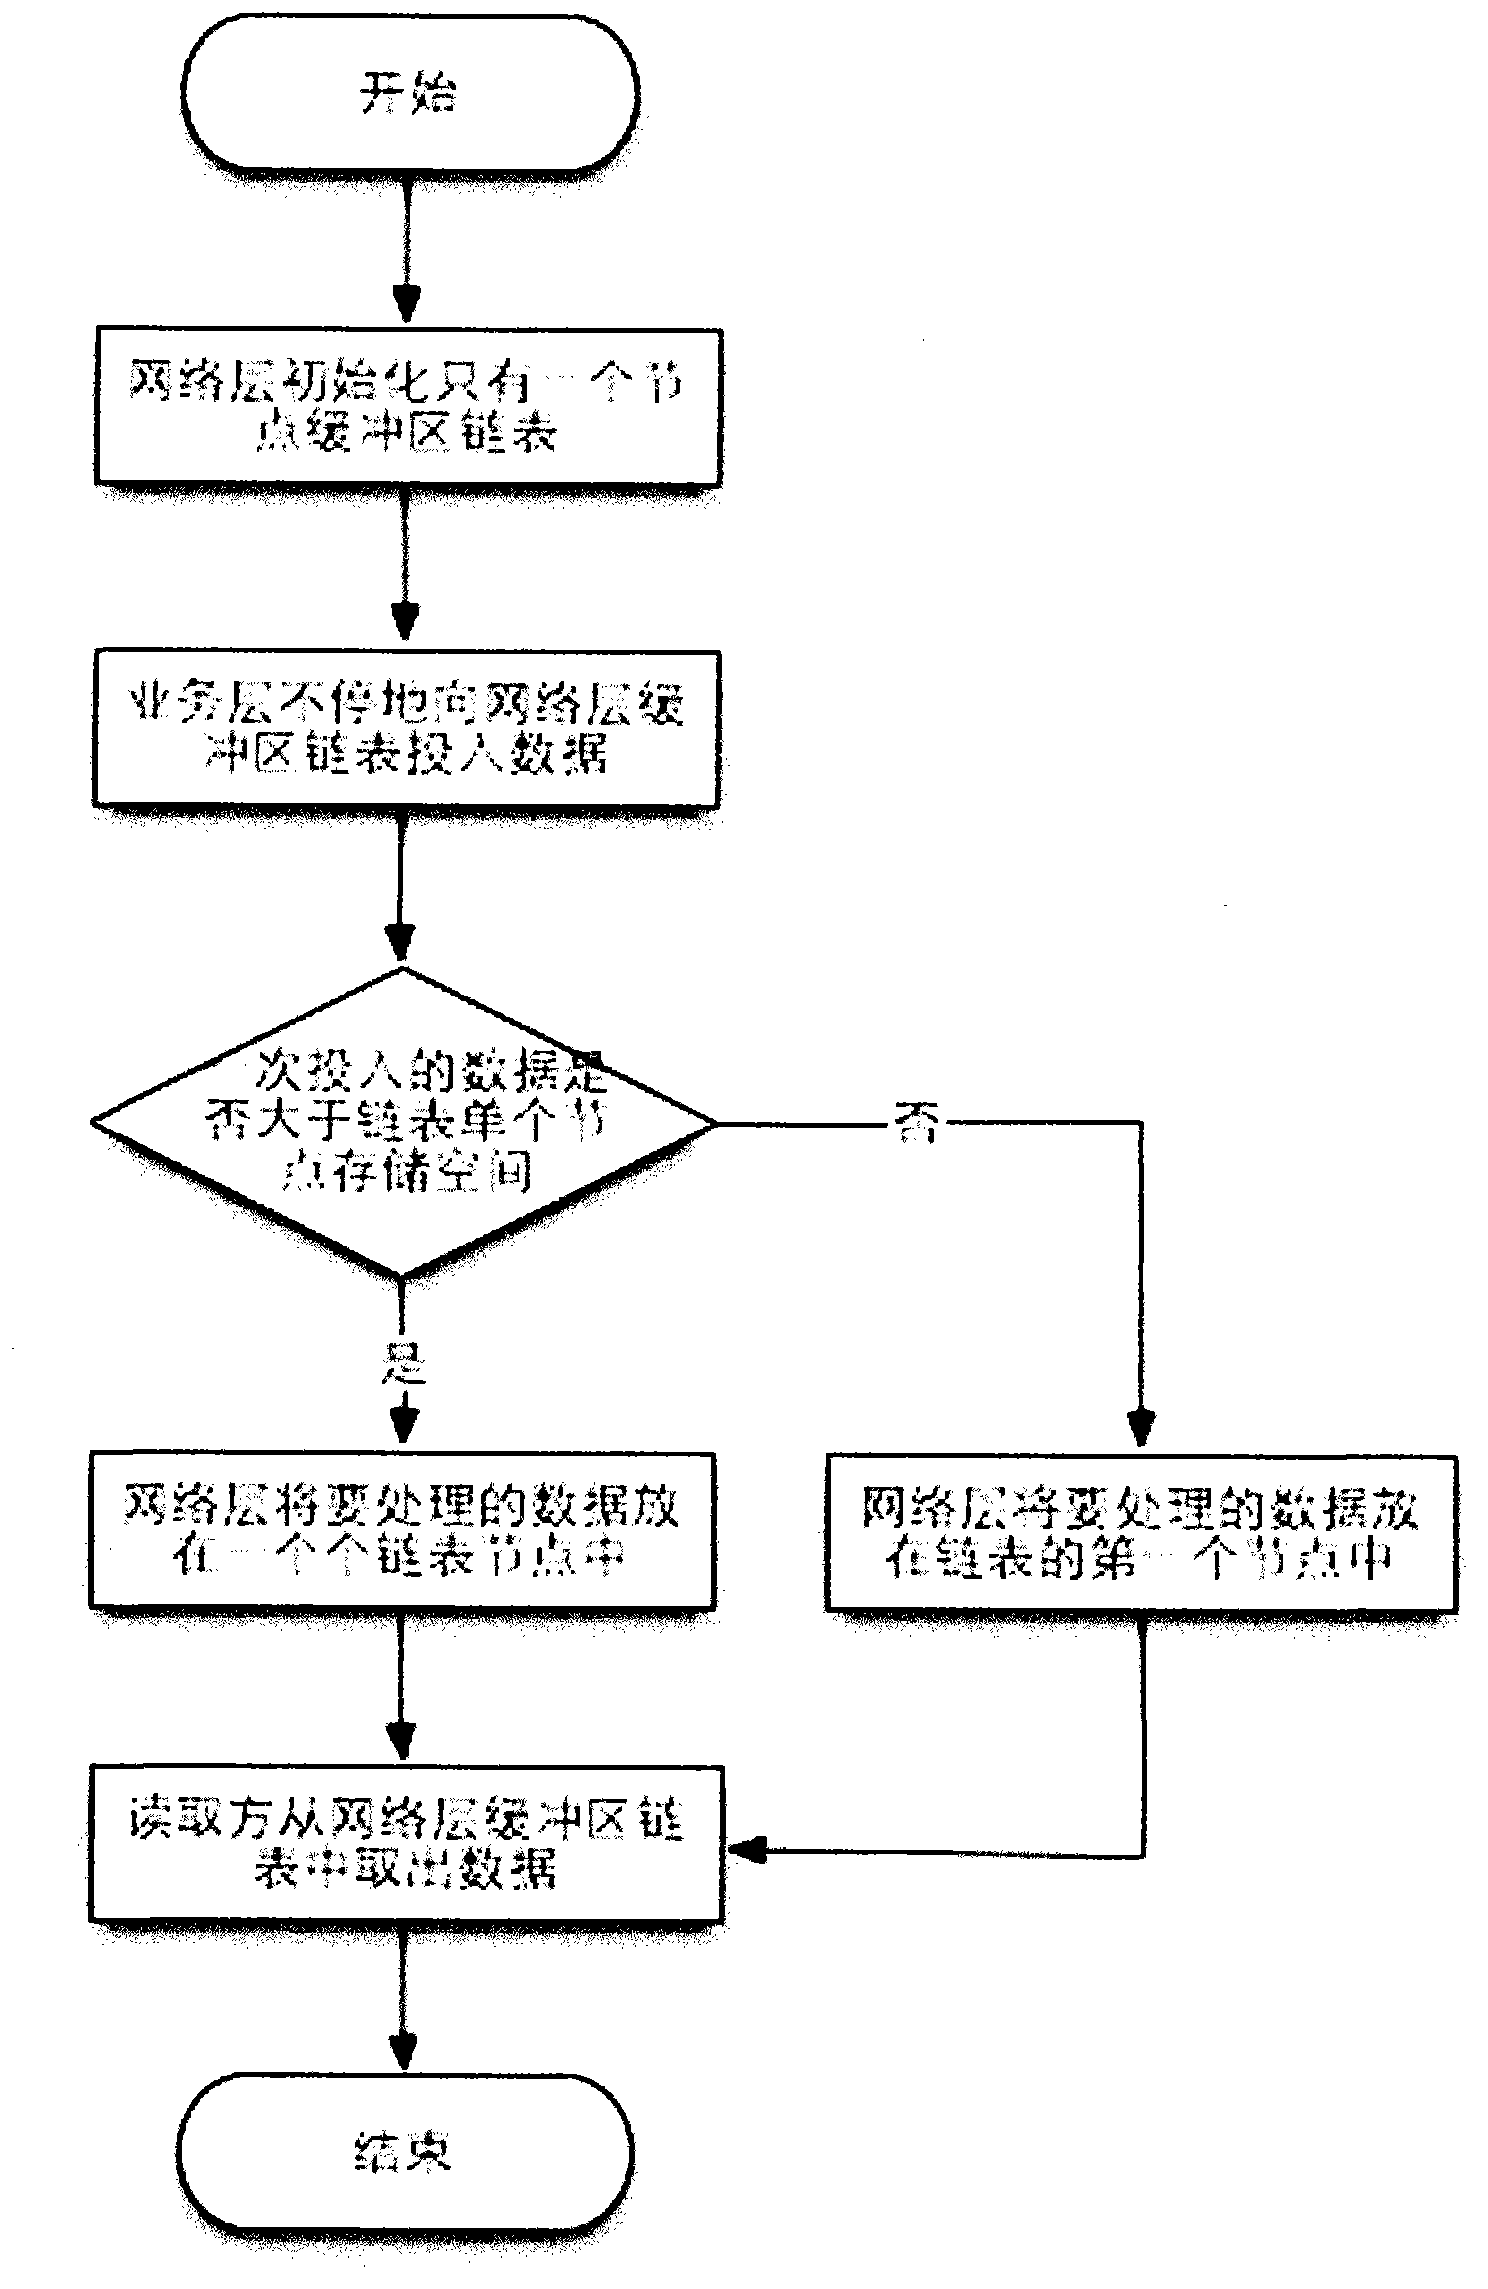 Design method for improving memory usage rate of buffer area in network programming